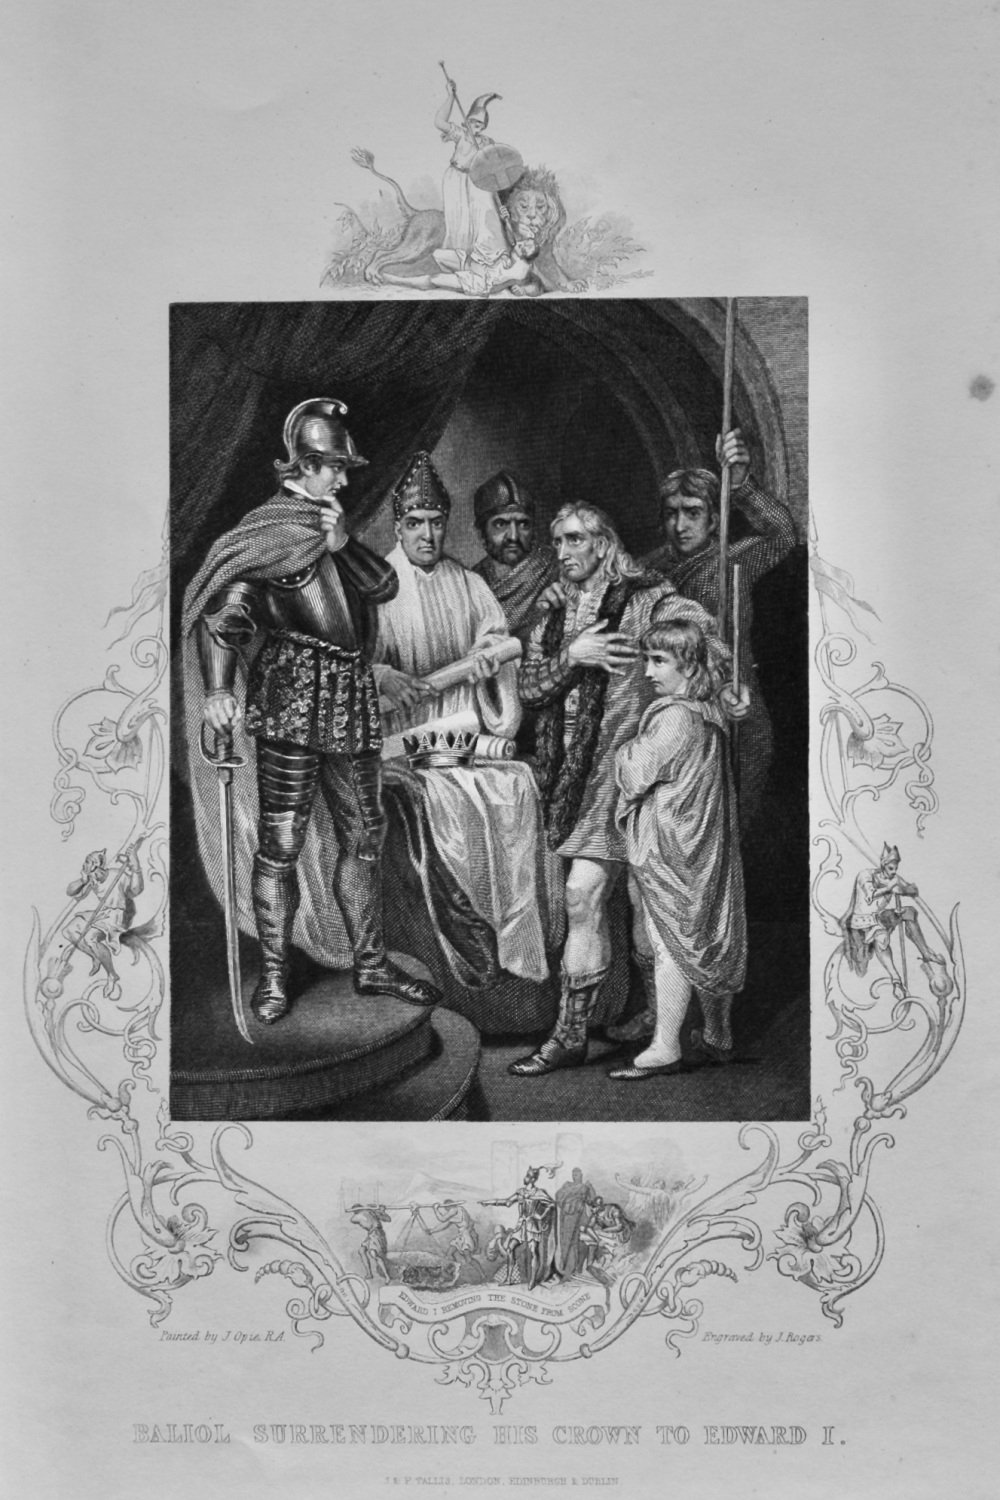 Baliol Surrendering His Crown to Edward I.